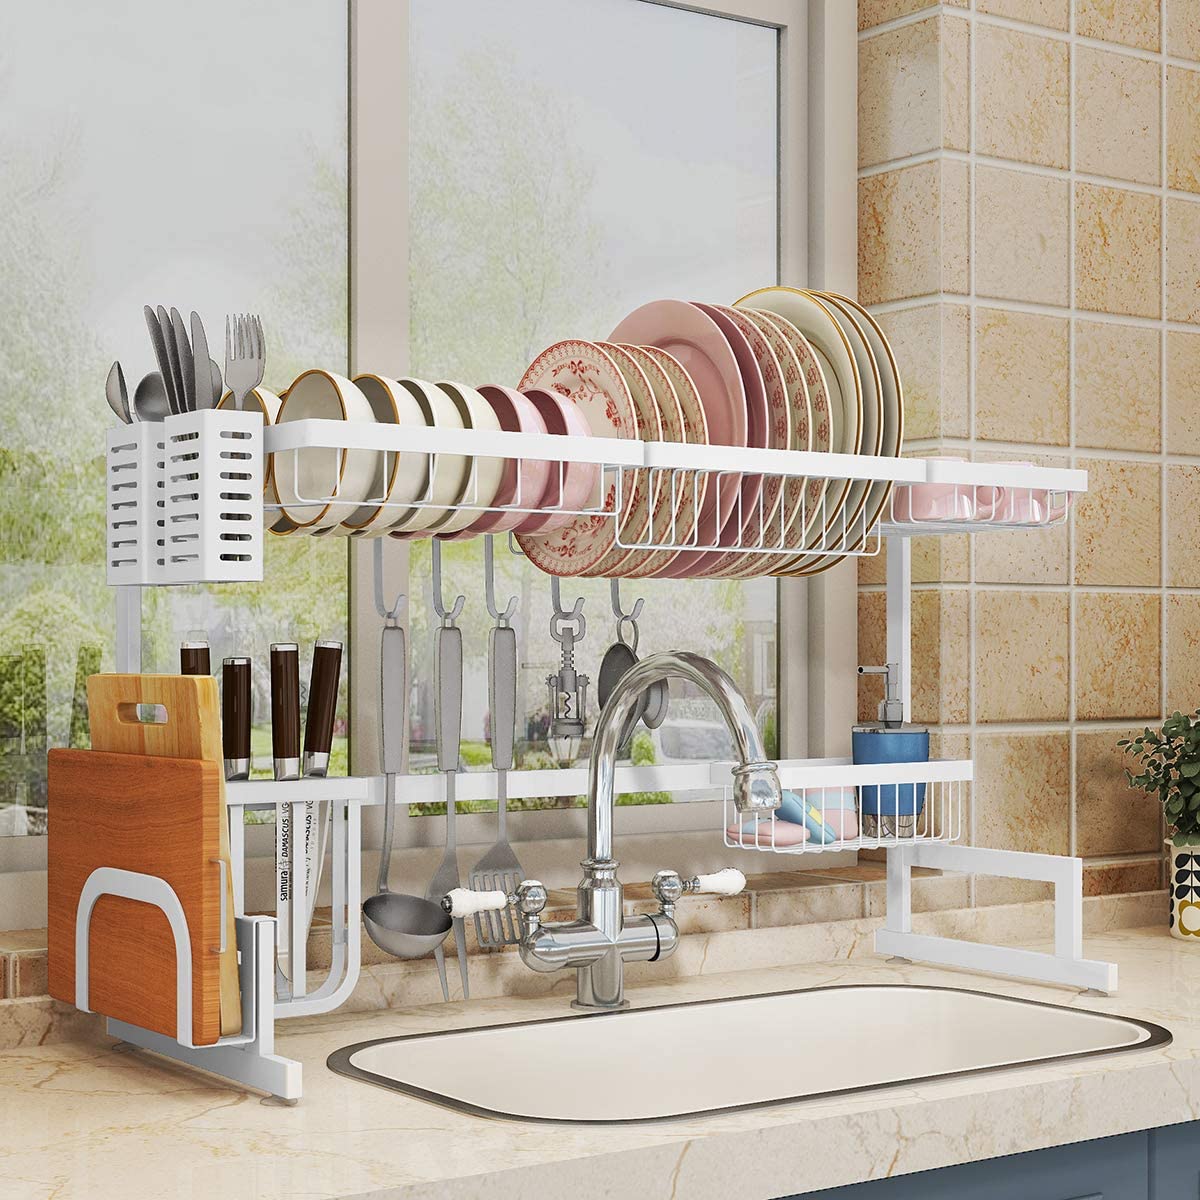 Over Sink(24"-40") Dish Drying Rack, Adjustable Cutlery Holders Drainer Shelf for Kitchen